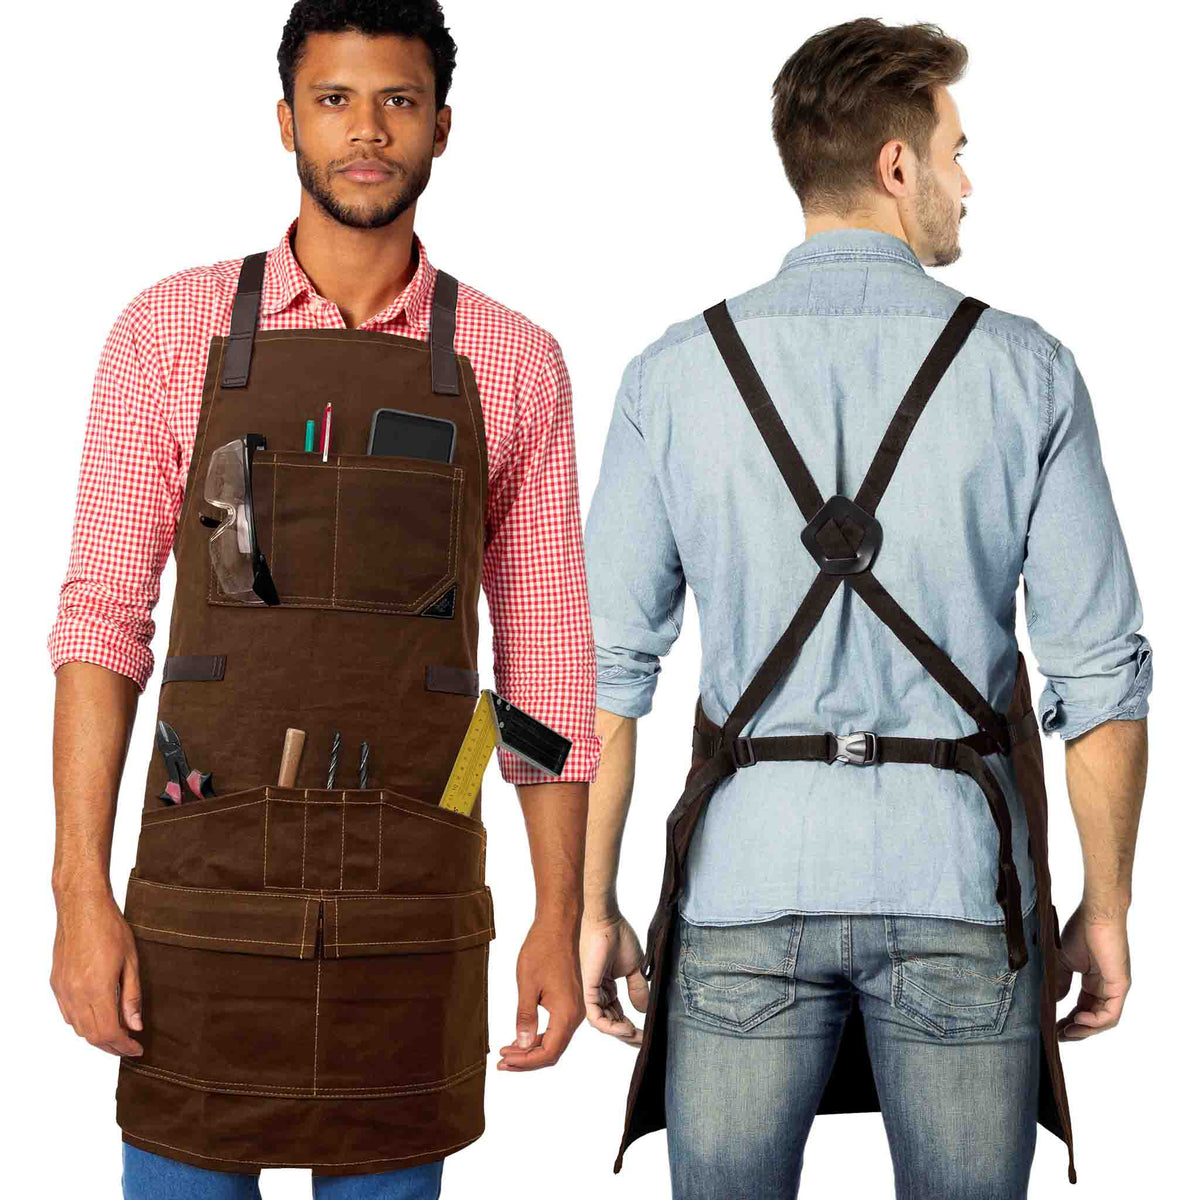 Woodwork Apron - 12 pockets &amp; loops, Waxed Canvas, Cross-Back, Leather Reinforcement - Carpenter, Workshop, Tool - Under Ny Sky